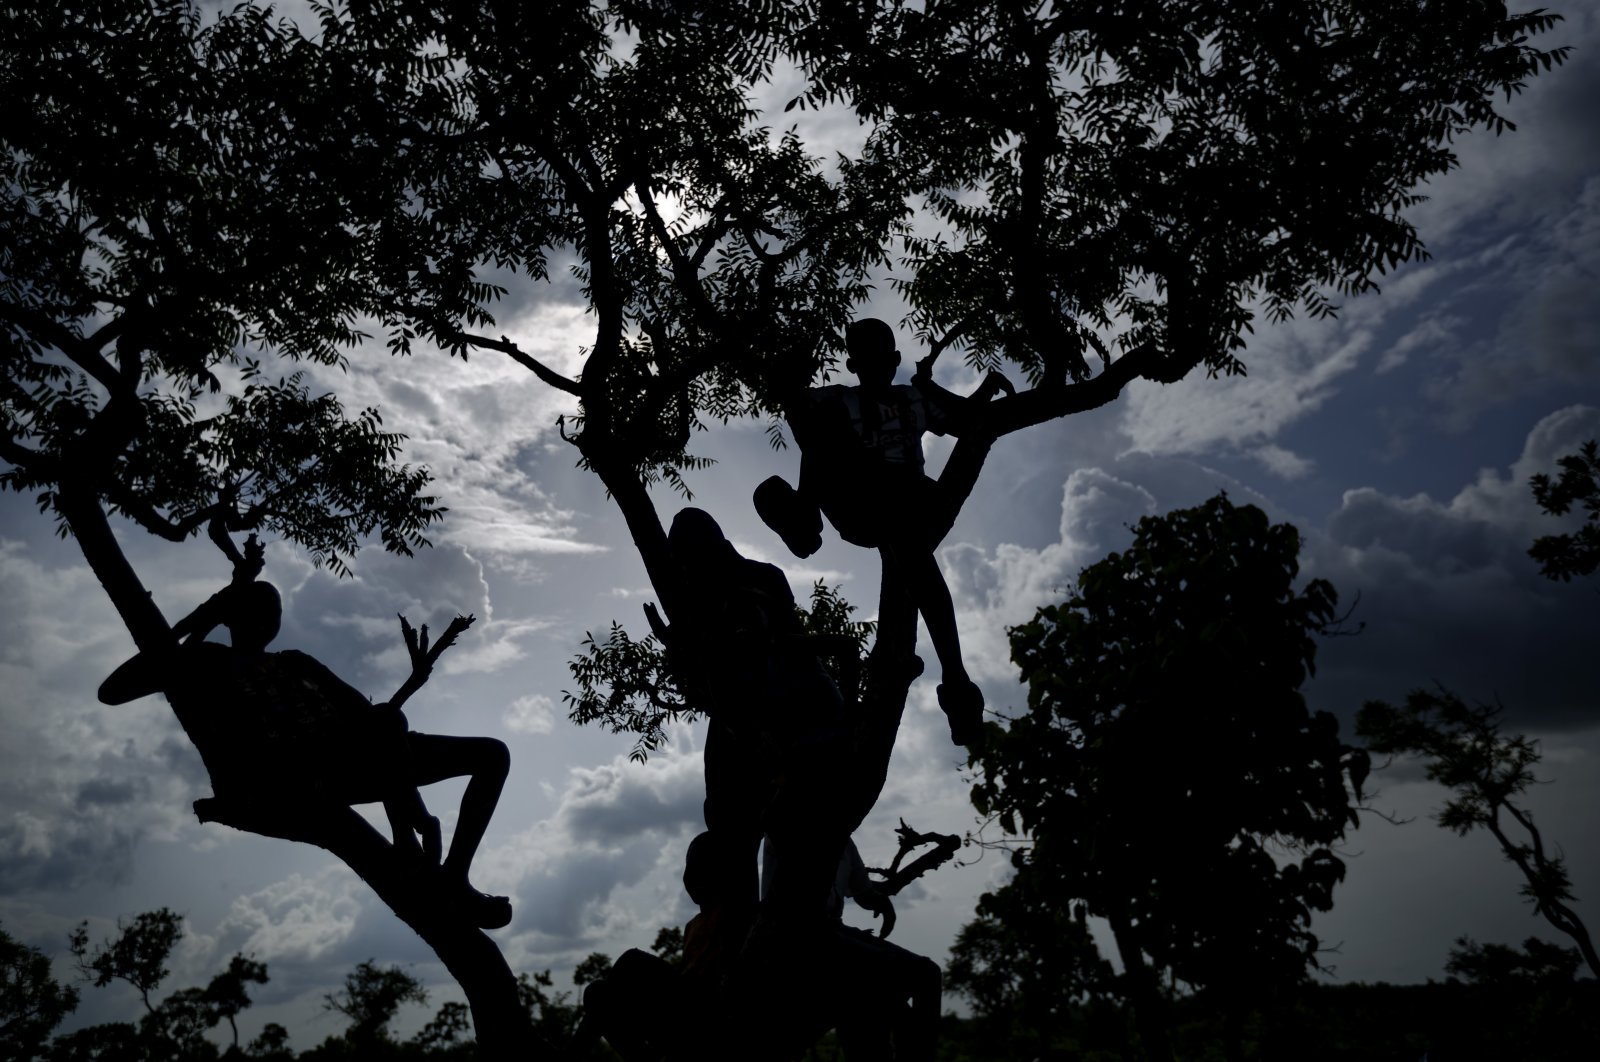 South Sudanese refugee boys sit in the branches of a tree to get a view of a match in the Bidi Bidi refugee settlement in northern Uganda, June 4, 2017. (AP File Photo)